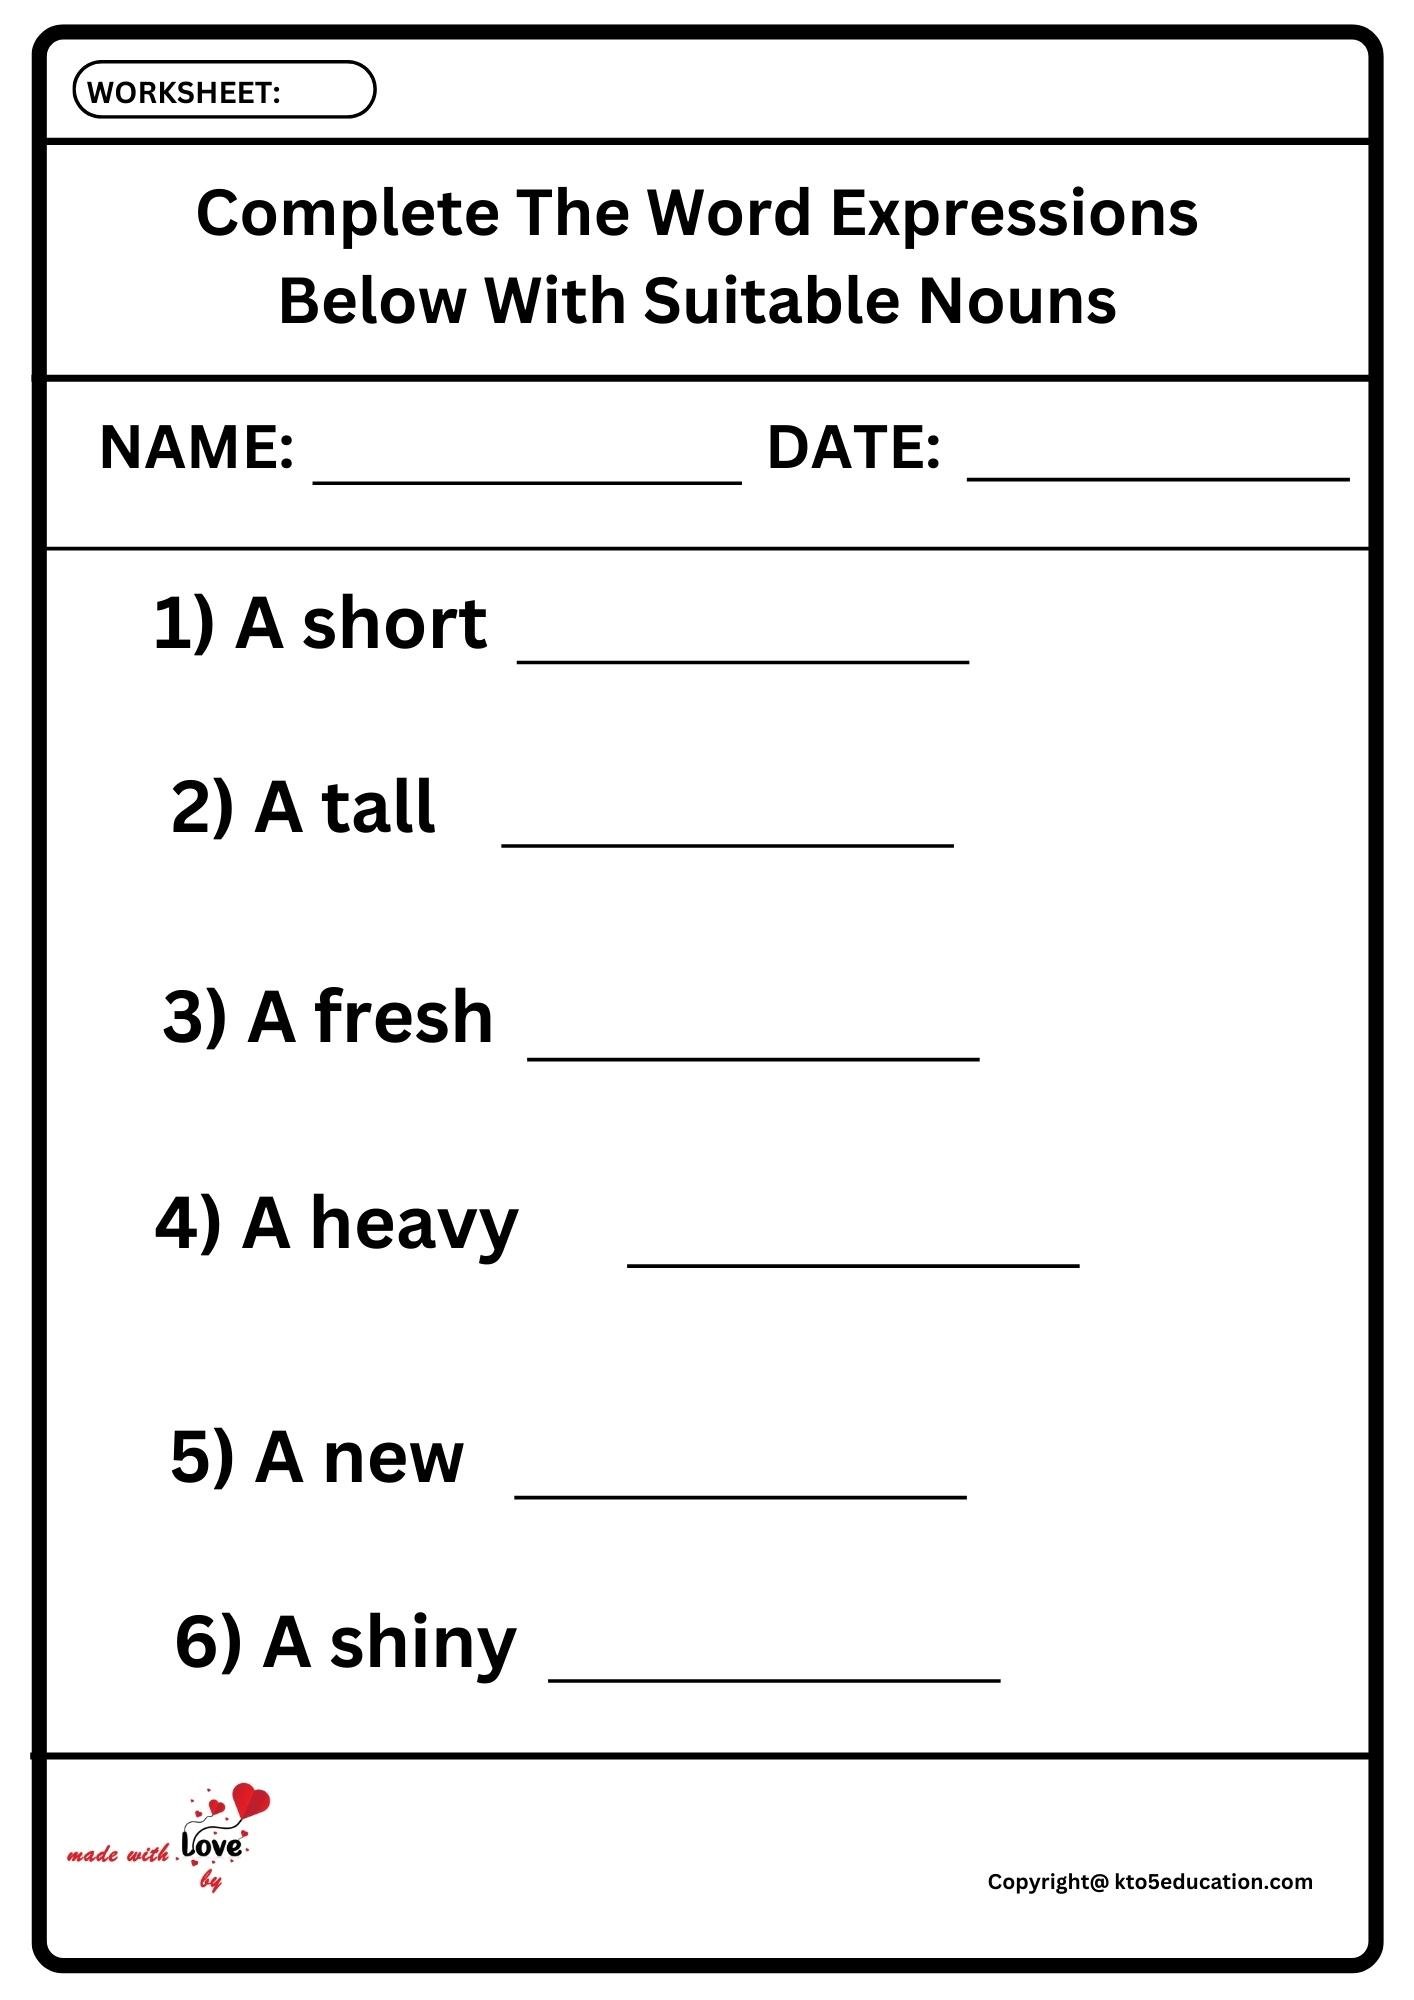 Complete The word Expressions Below With Suitable Nouns Worksheet 2